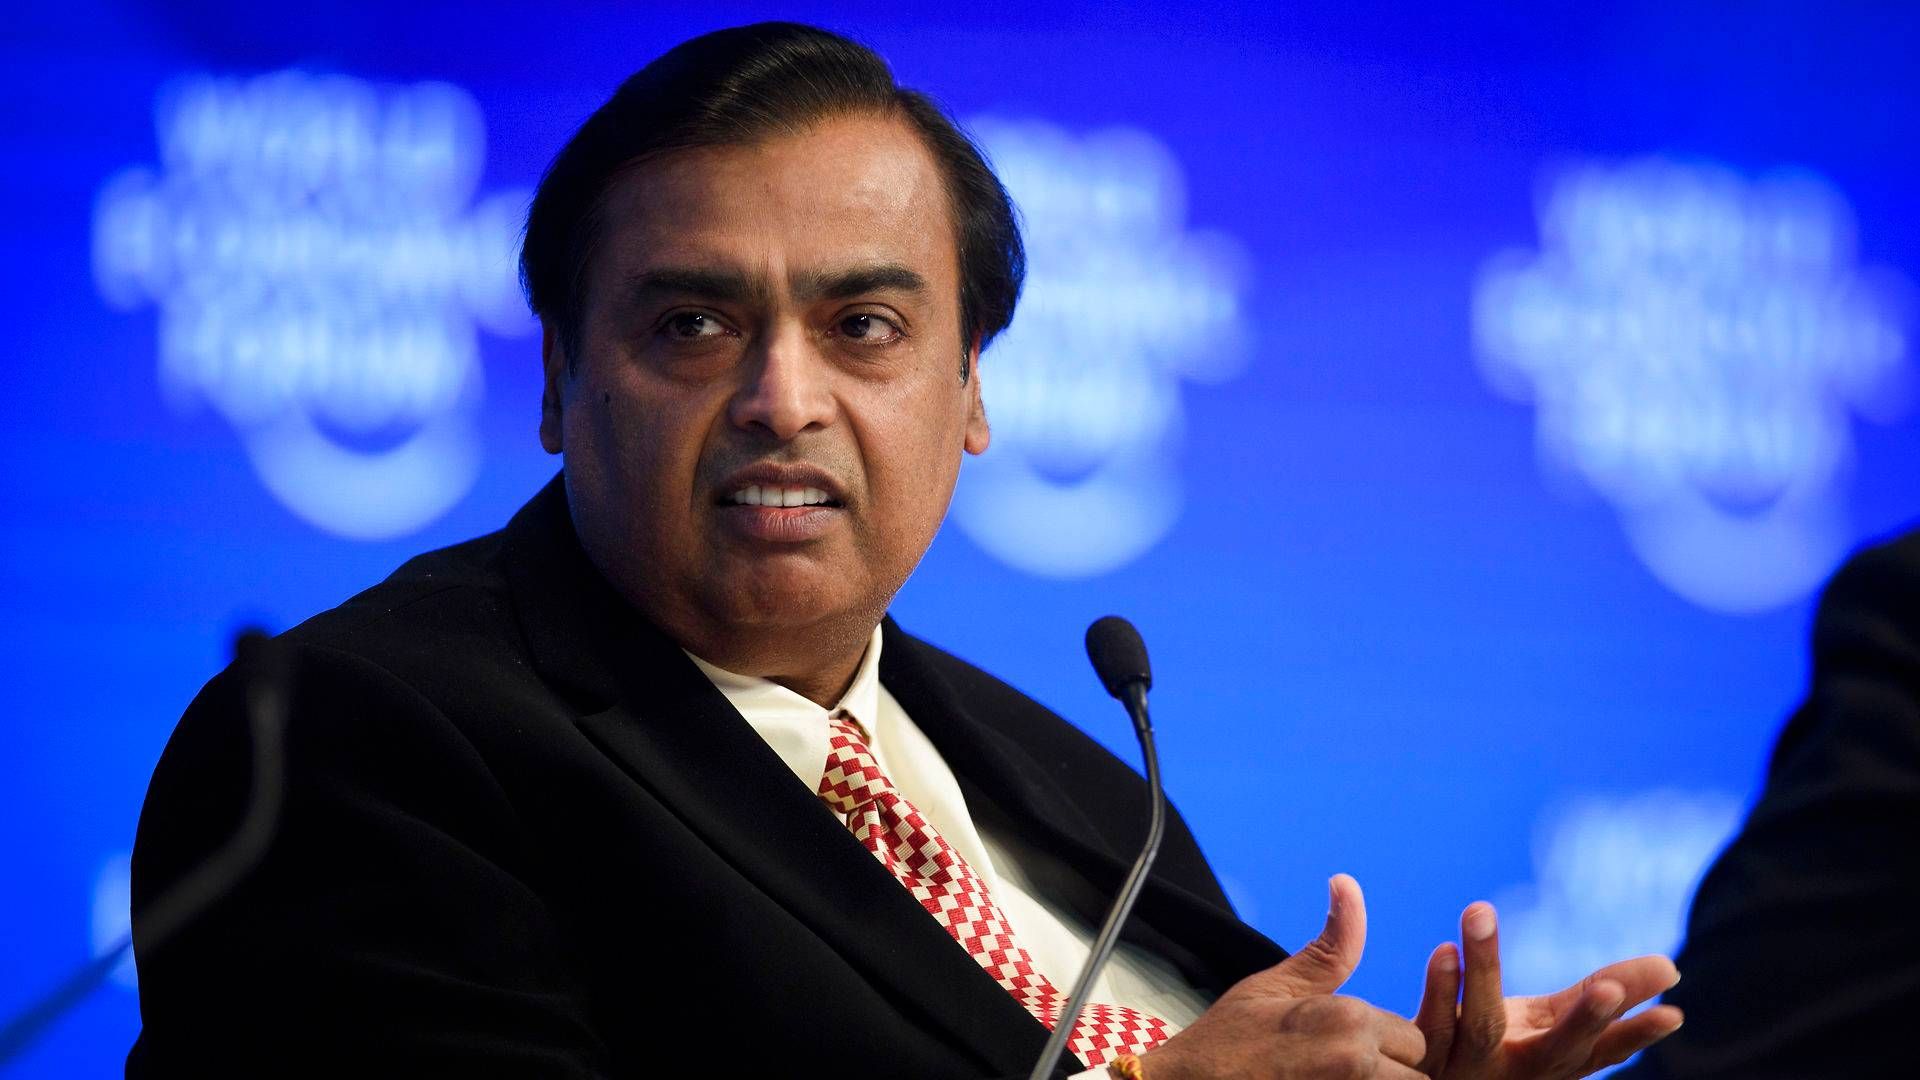 "We are delighted to expand our partnership with BP, one of the global leaders in the fuel-retailing sector. This partnership is a testimony to the strong ties between BP and RIL. Our robust partnership in developing gas resources in India has now expanded to fuel retailing and aviation fuels," says RIL Chair Mukesh Ambani. | Photo: Gian Ehrenzeller / AP / Ritzau Scanpix